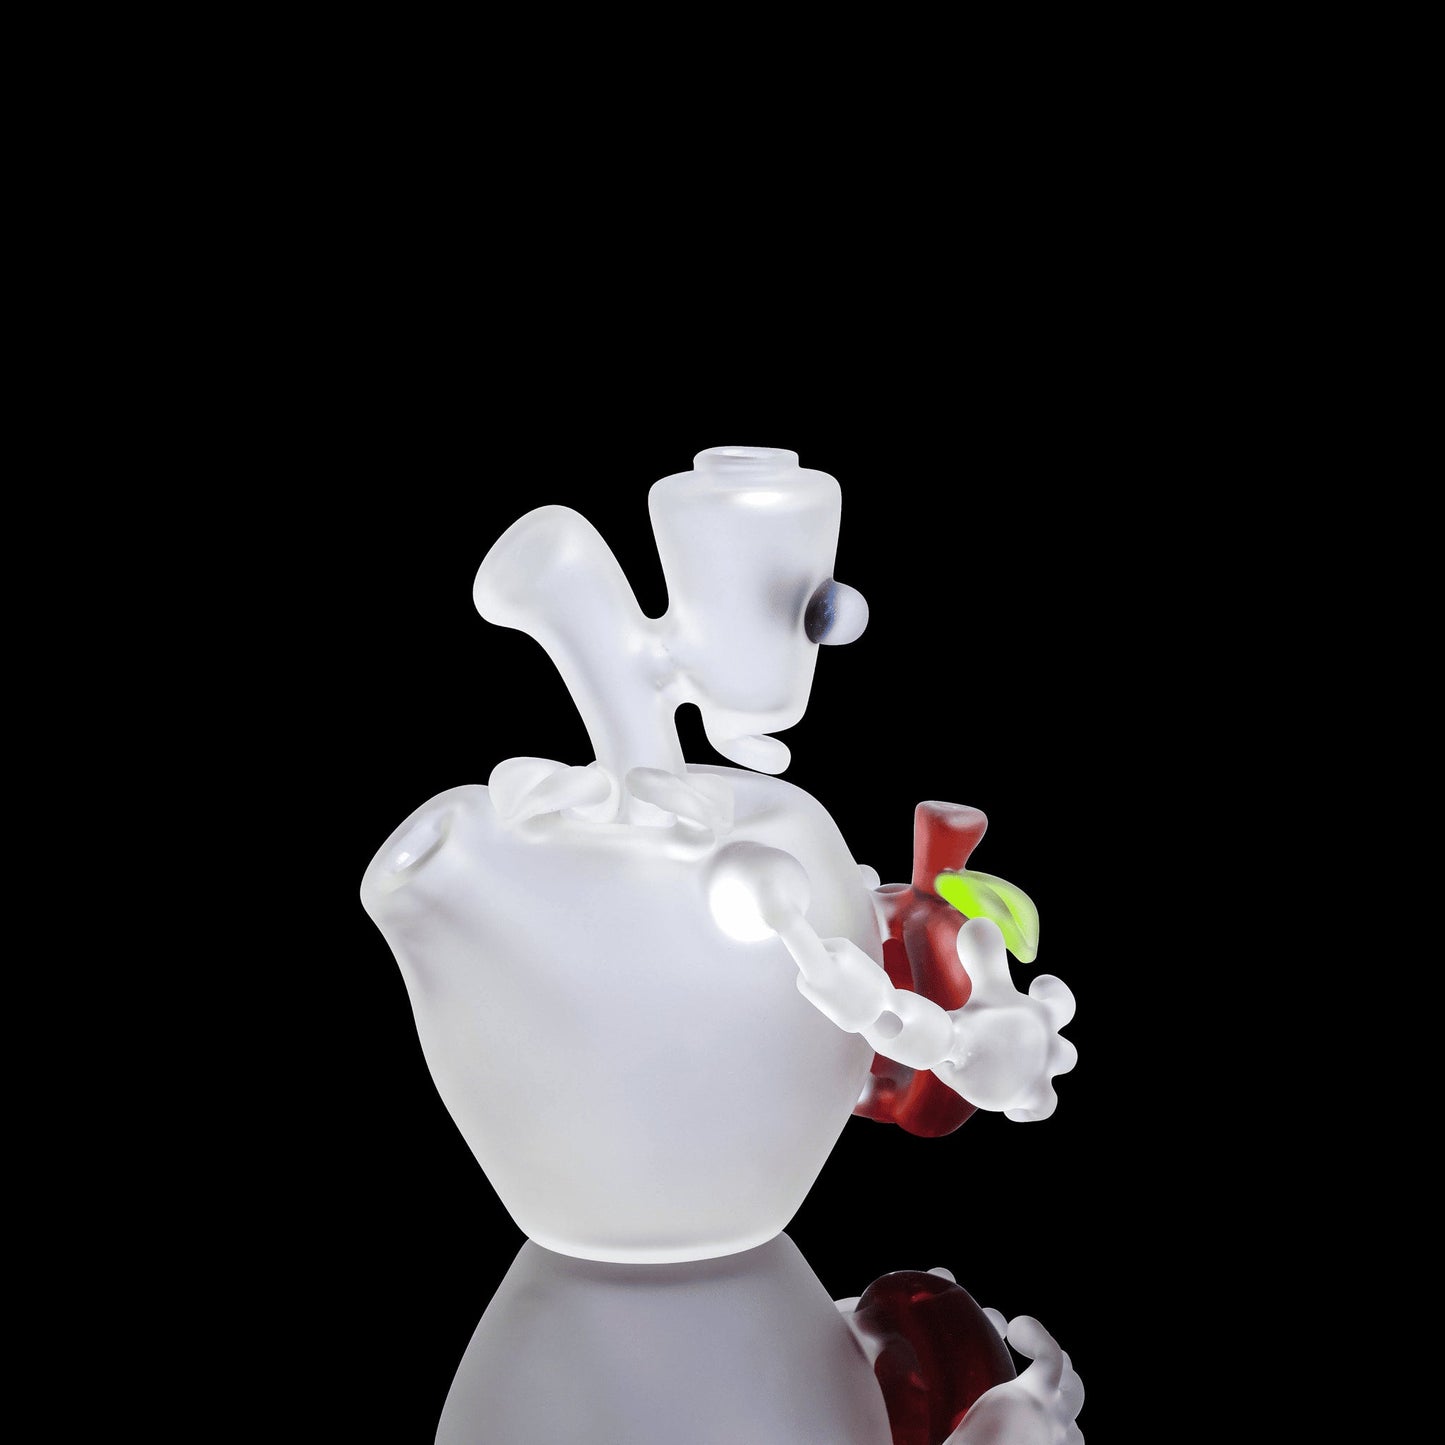 artisan-crafted design of the Apple Brobot Rig by Pouch Glass